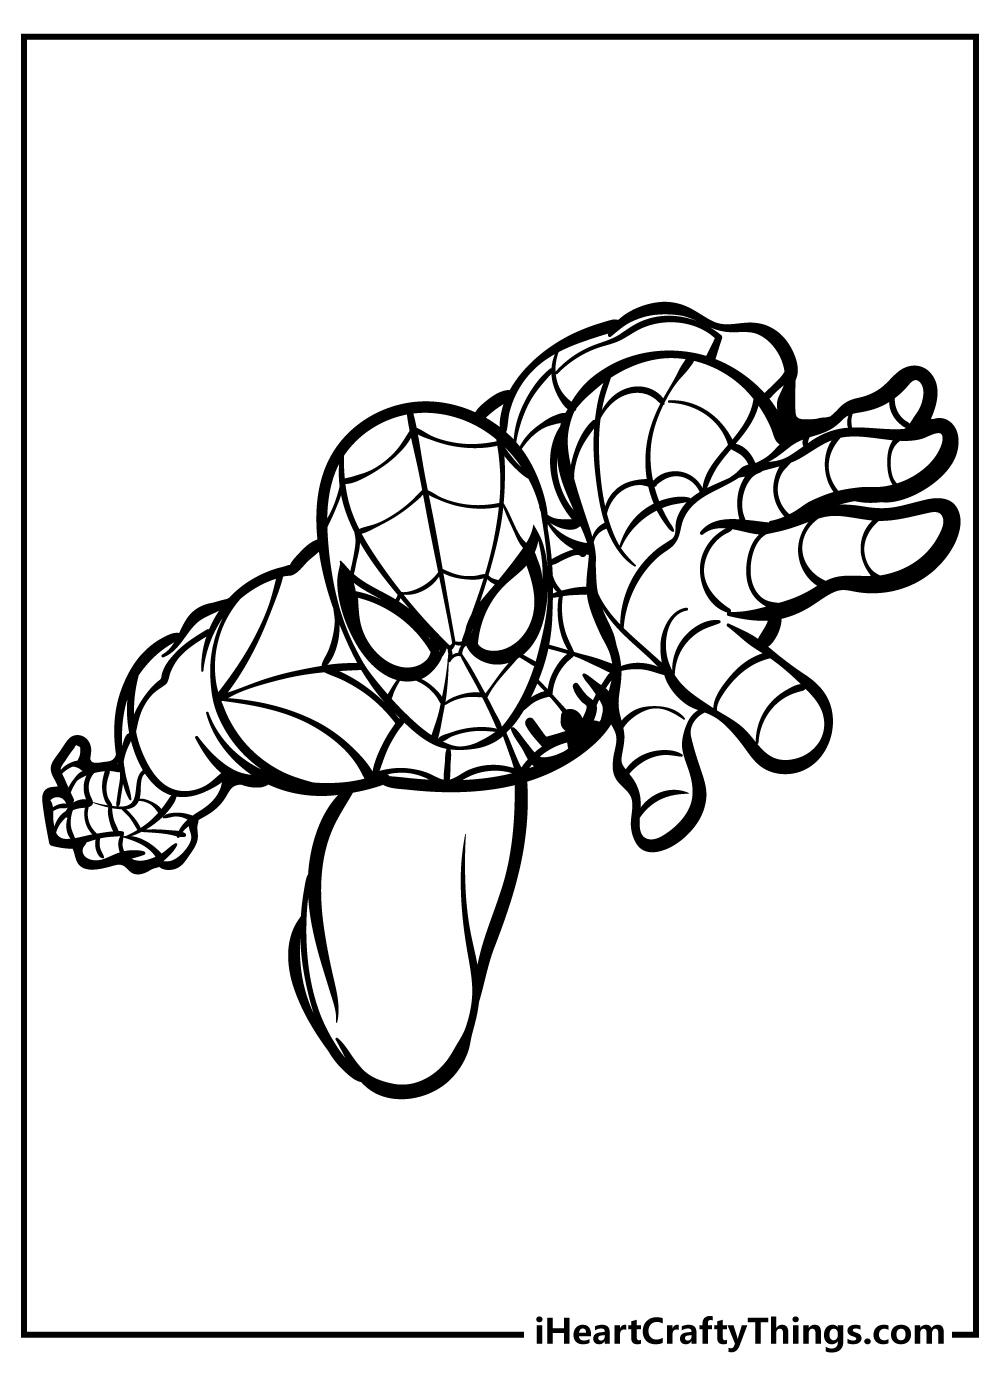 Printable Spider Man Coloring Pages Updated 21